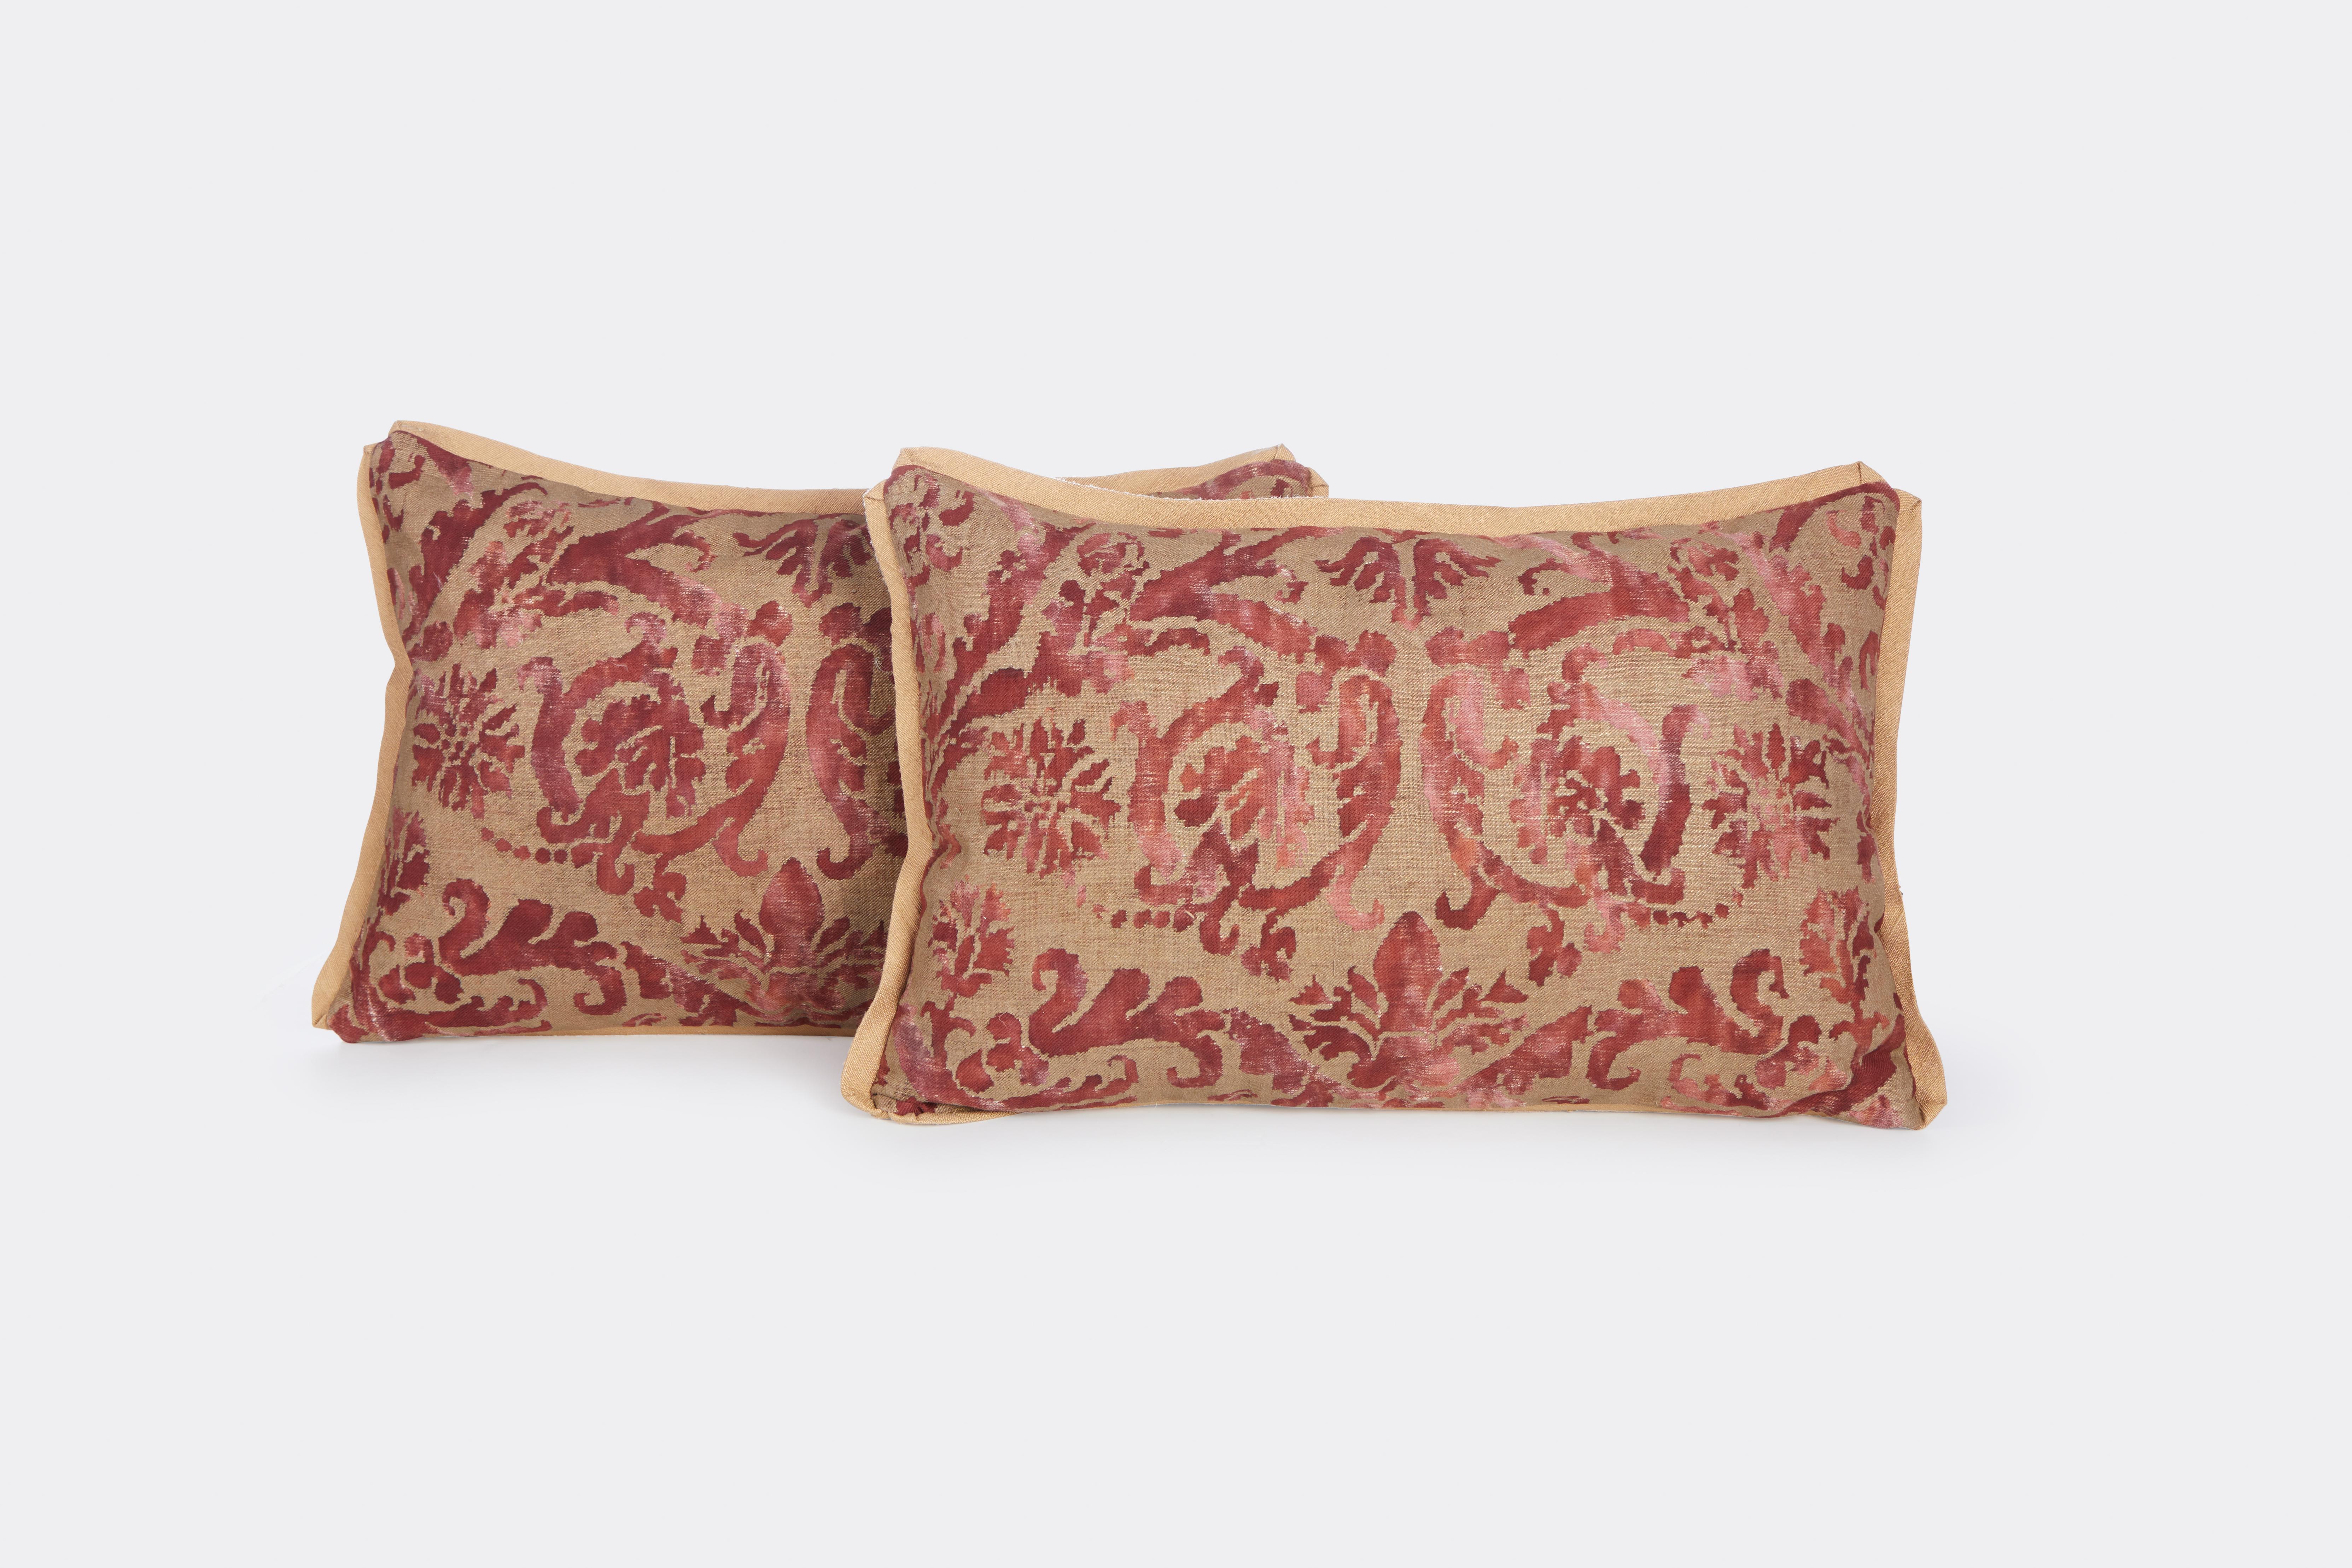 A pair of wine and gold damask patterned Fortuny lumbar cushions with gold silk bias edging and gold silk backs fabric c. 1940s.